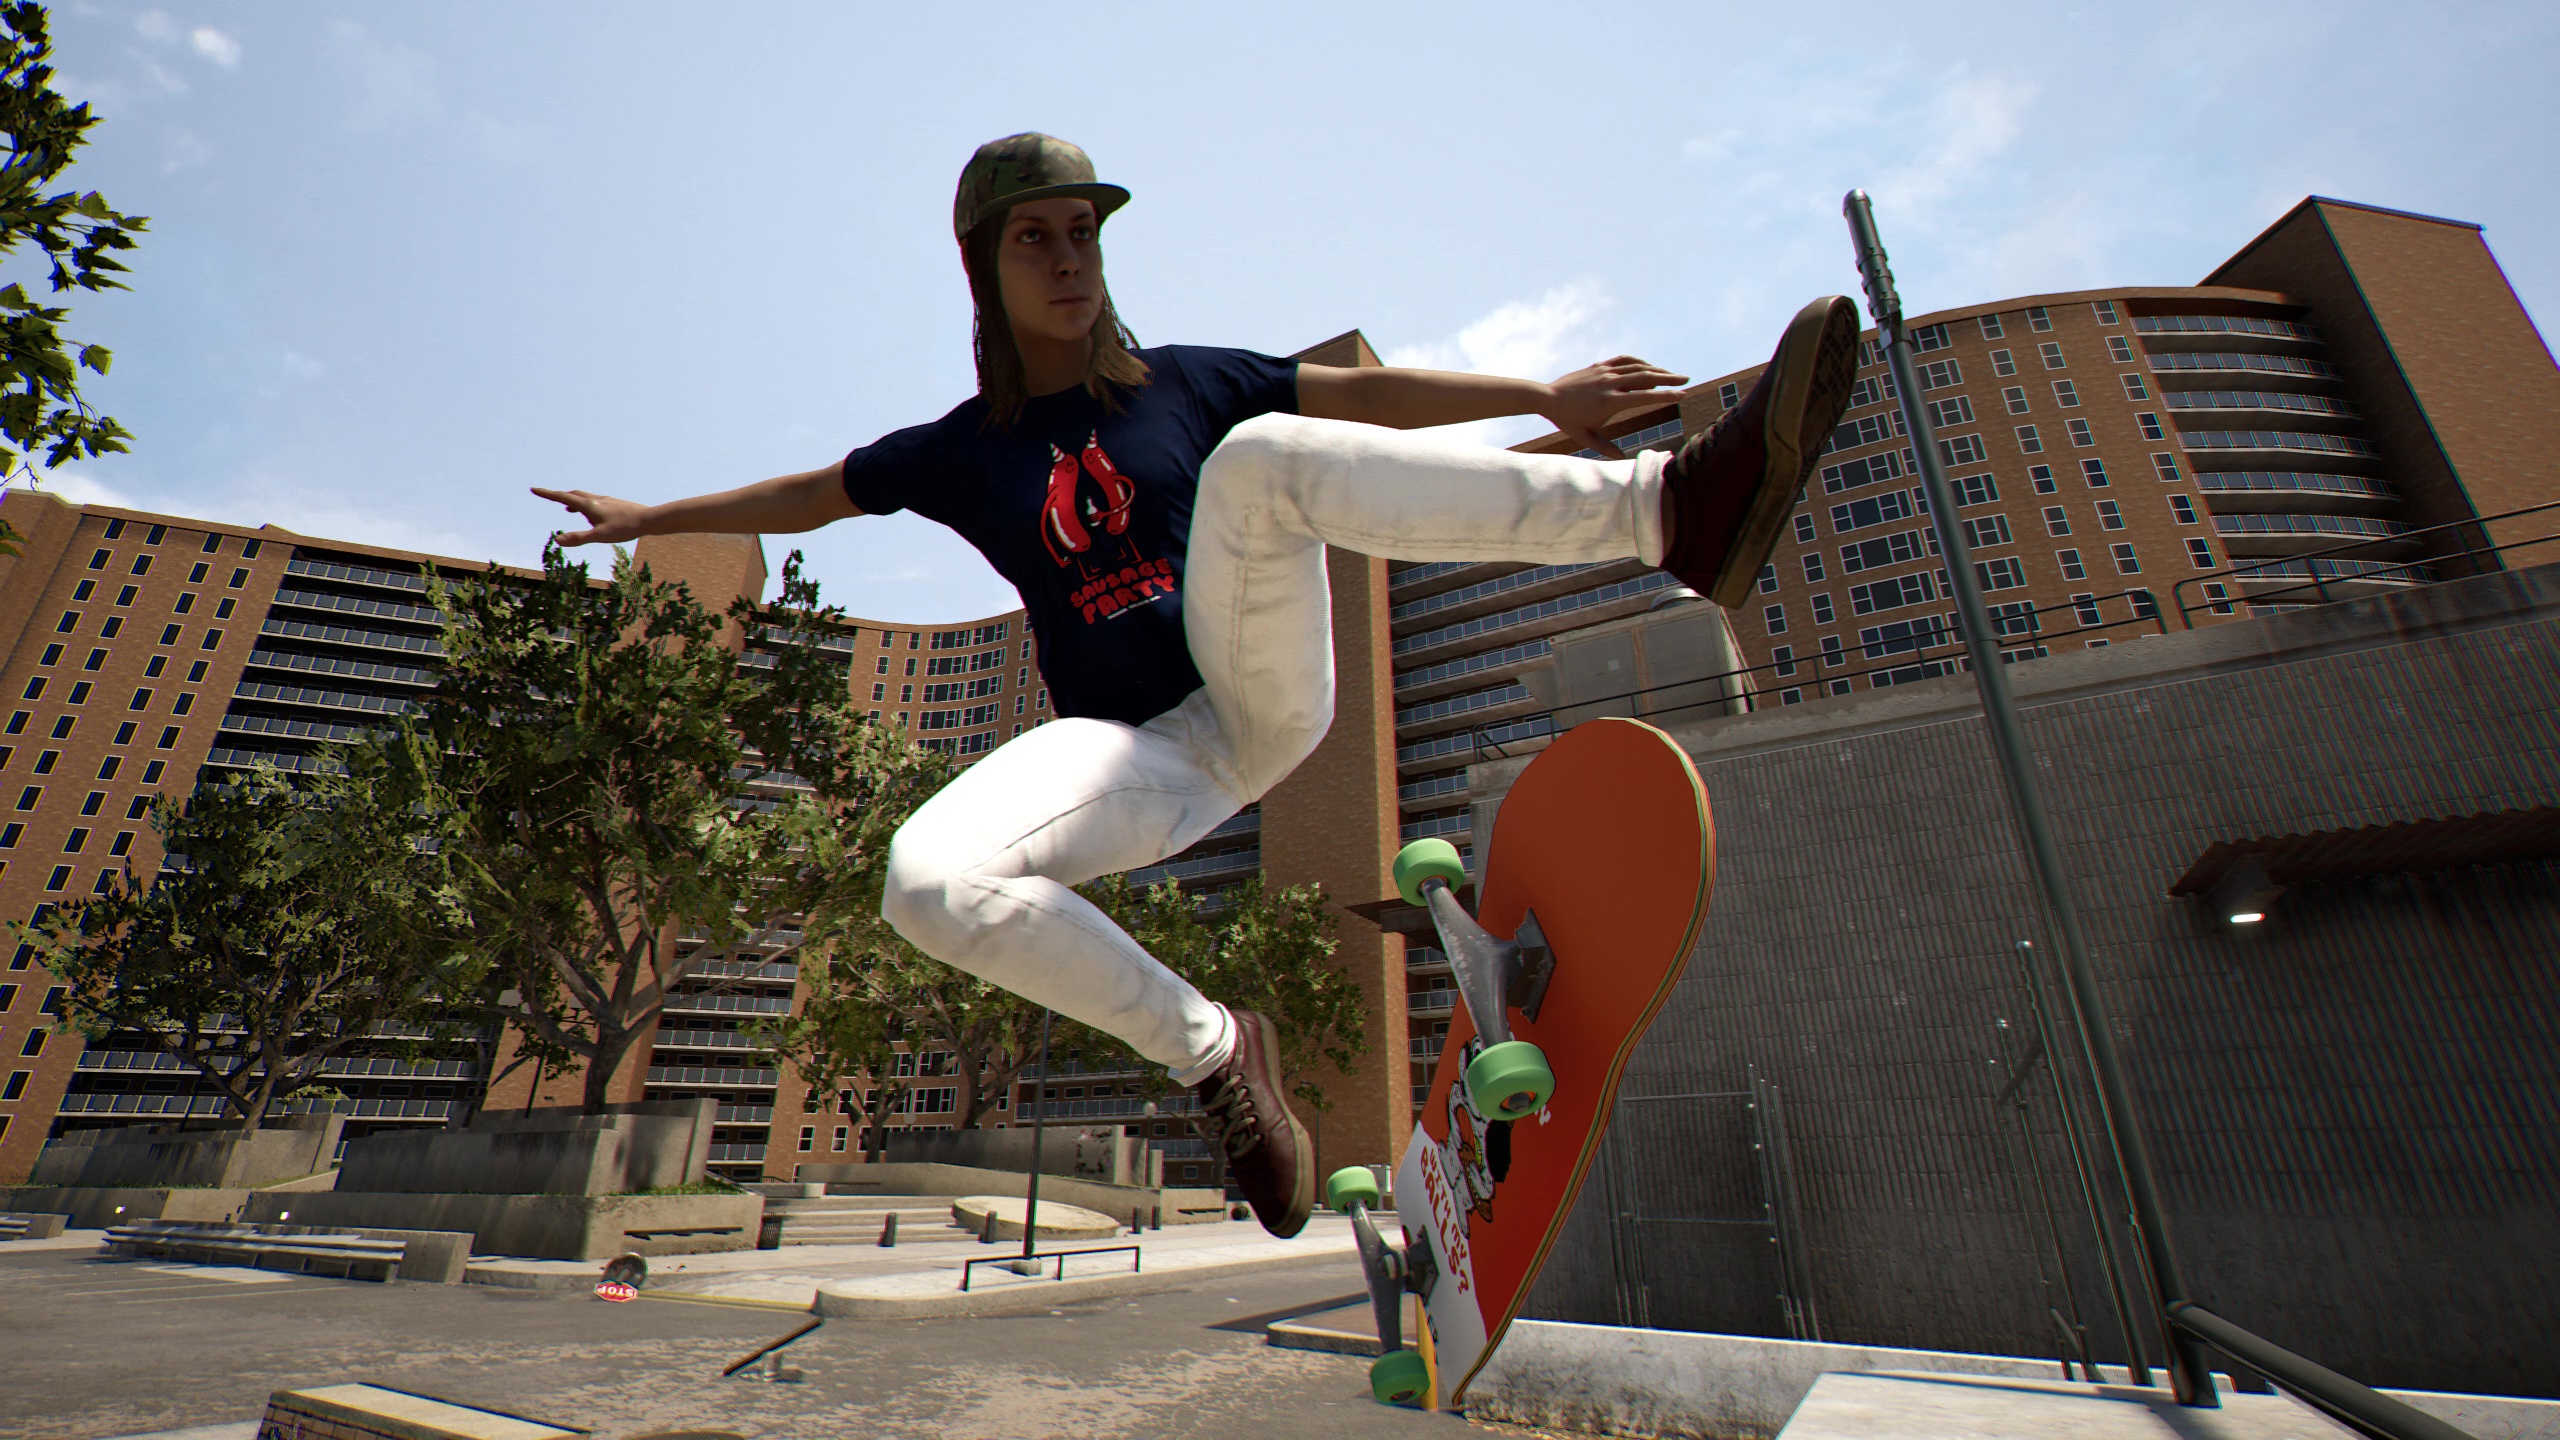 Our favorite skateboarding sim, Session, is getting a physics overhaul